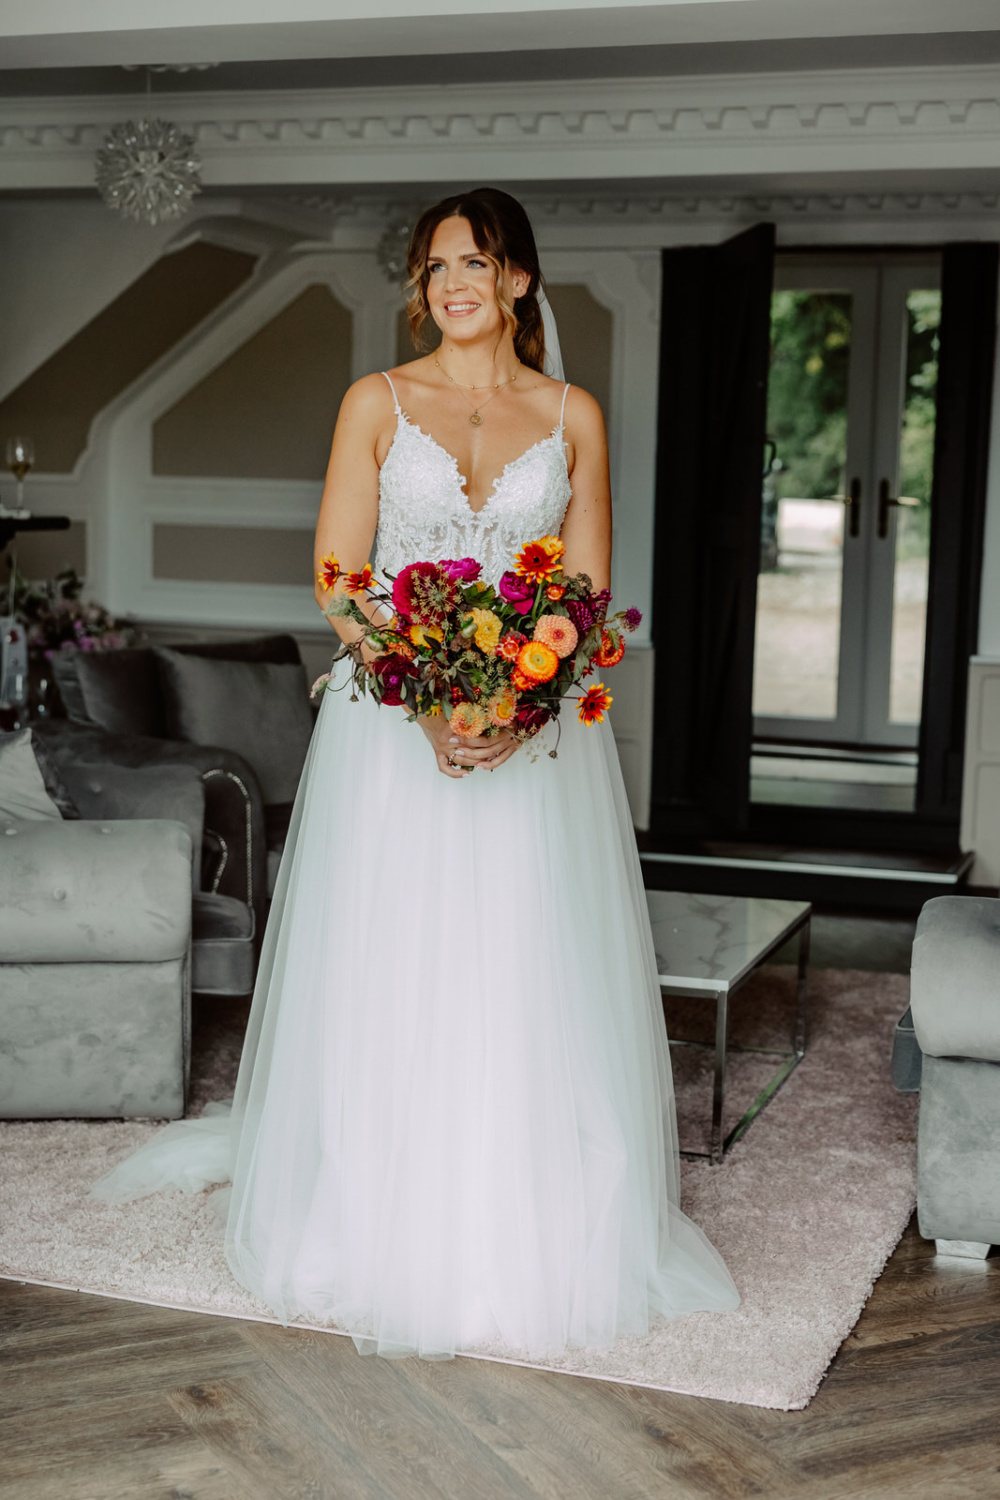 A bride in a wedding dress standing in a living room.